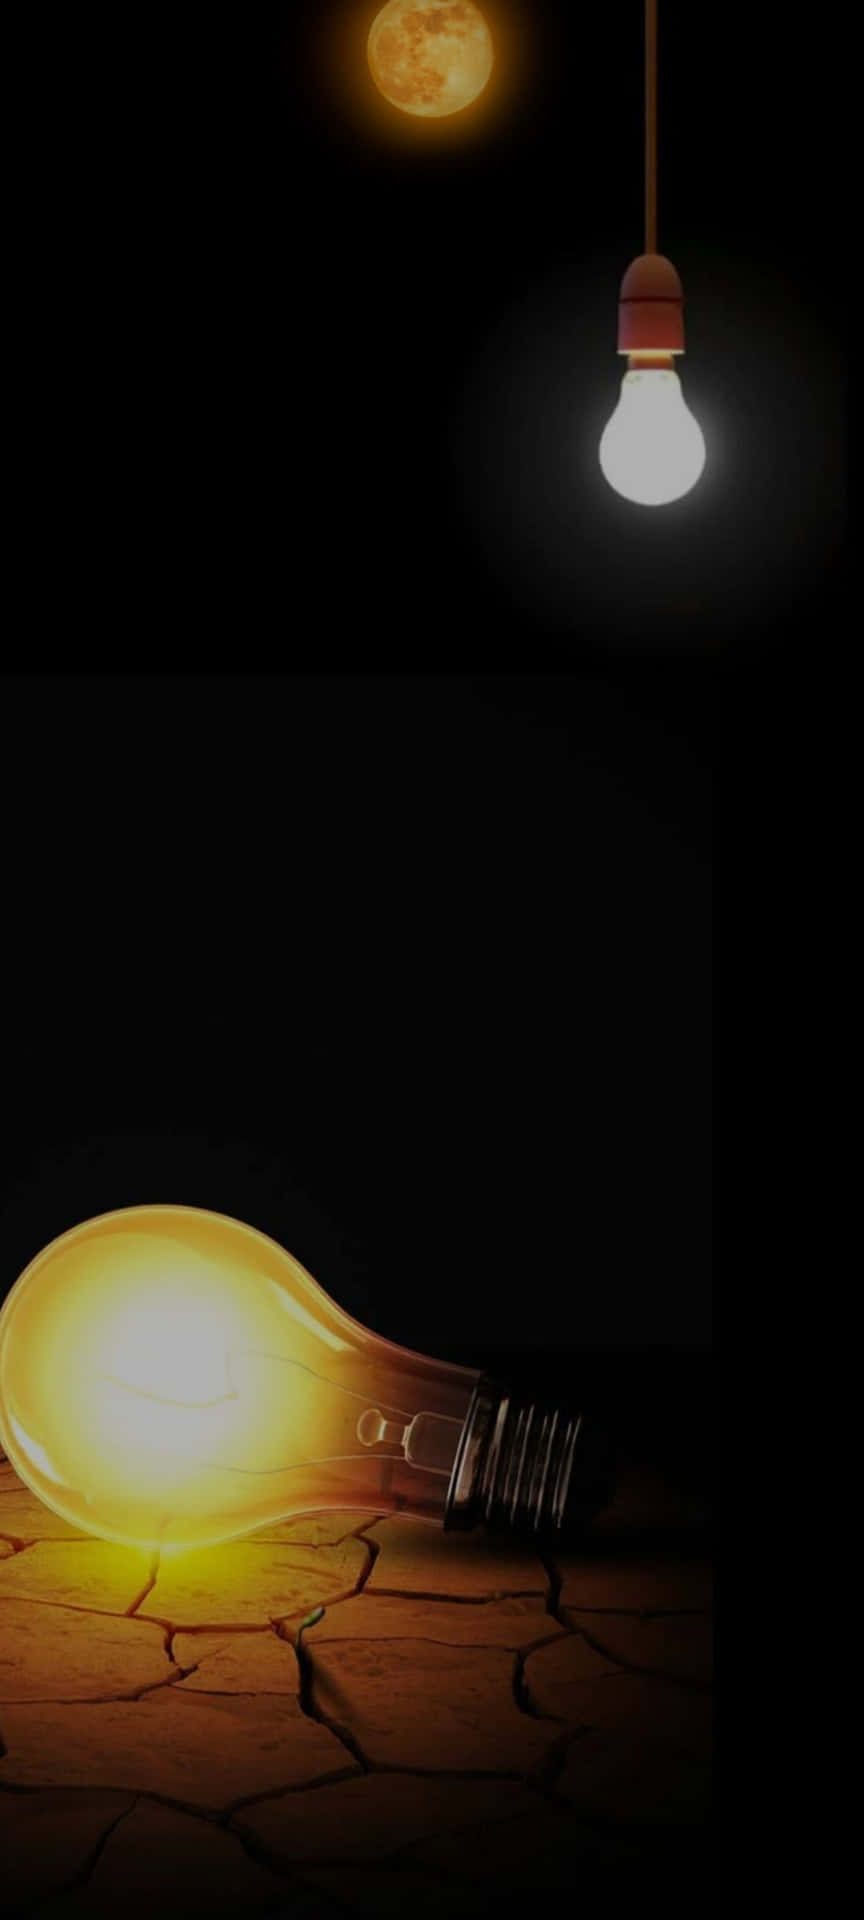 A Light Bulb And A Moon In The Dark Wallpaper